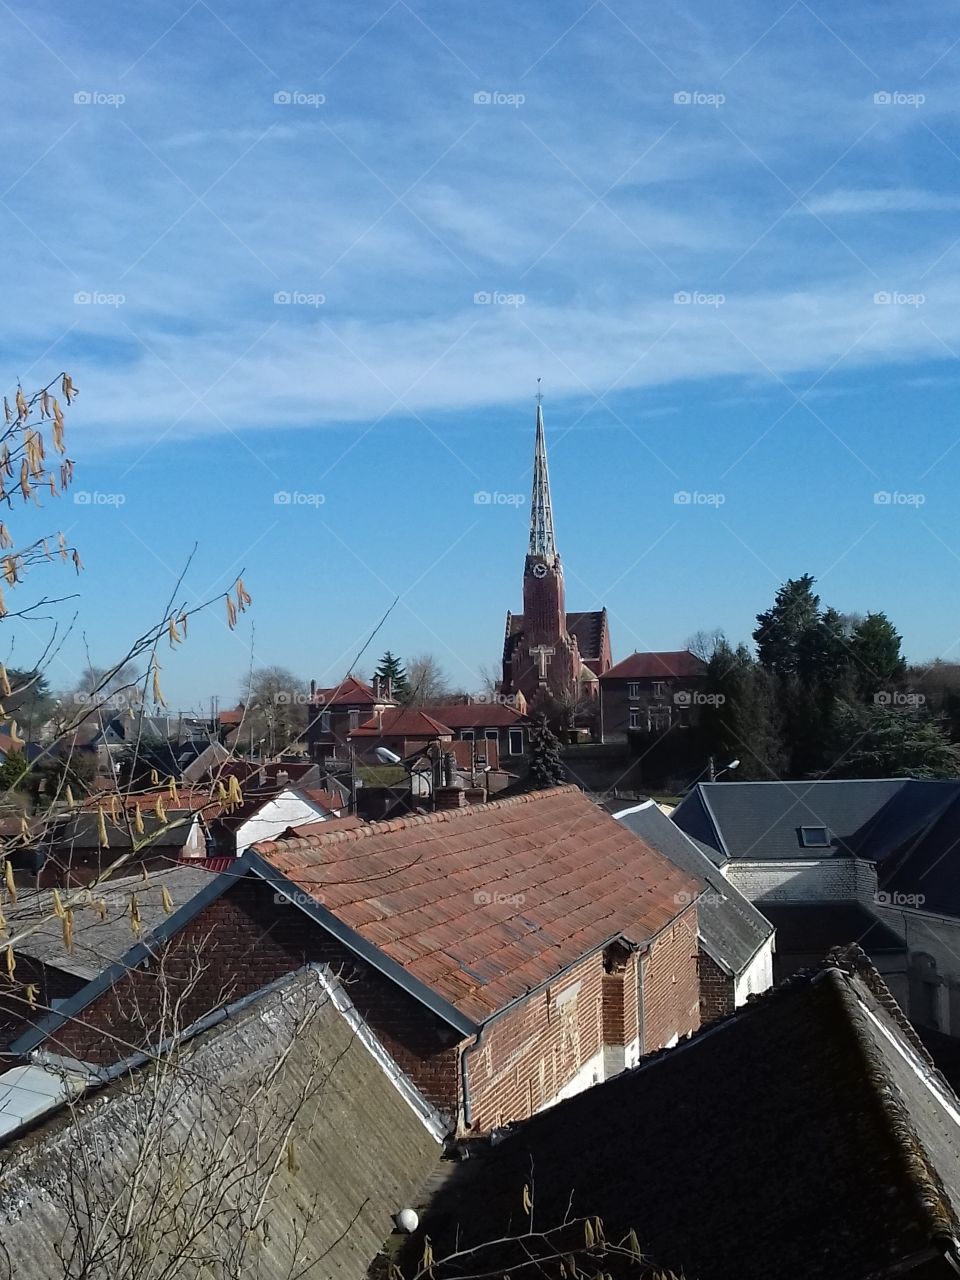 view of the blue sky, church and the houses in amiens france